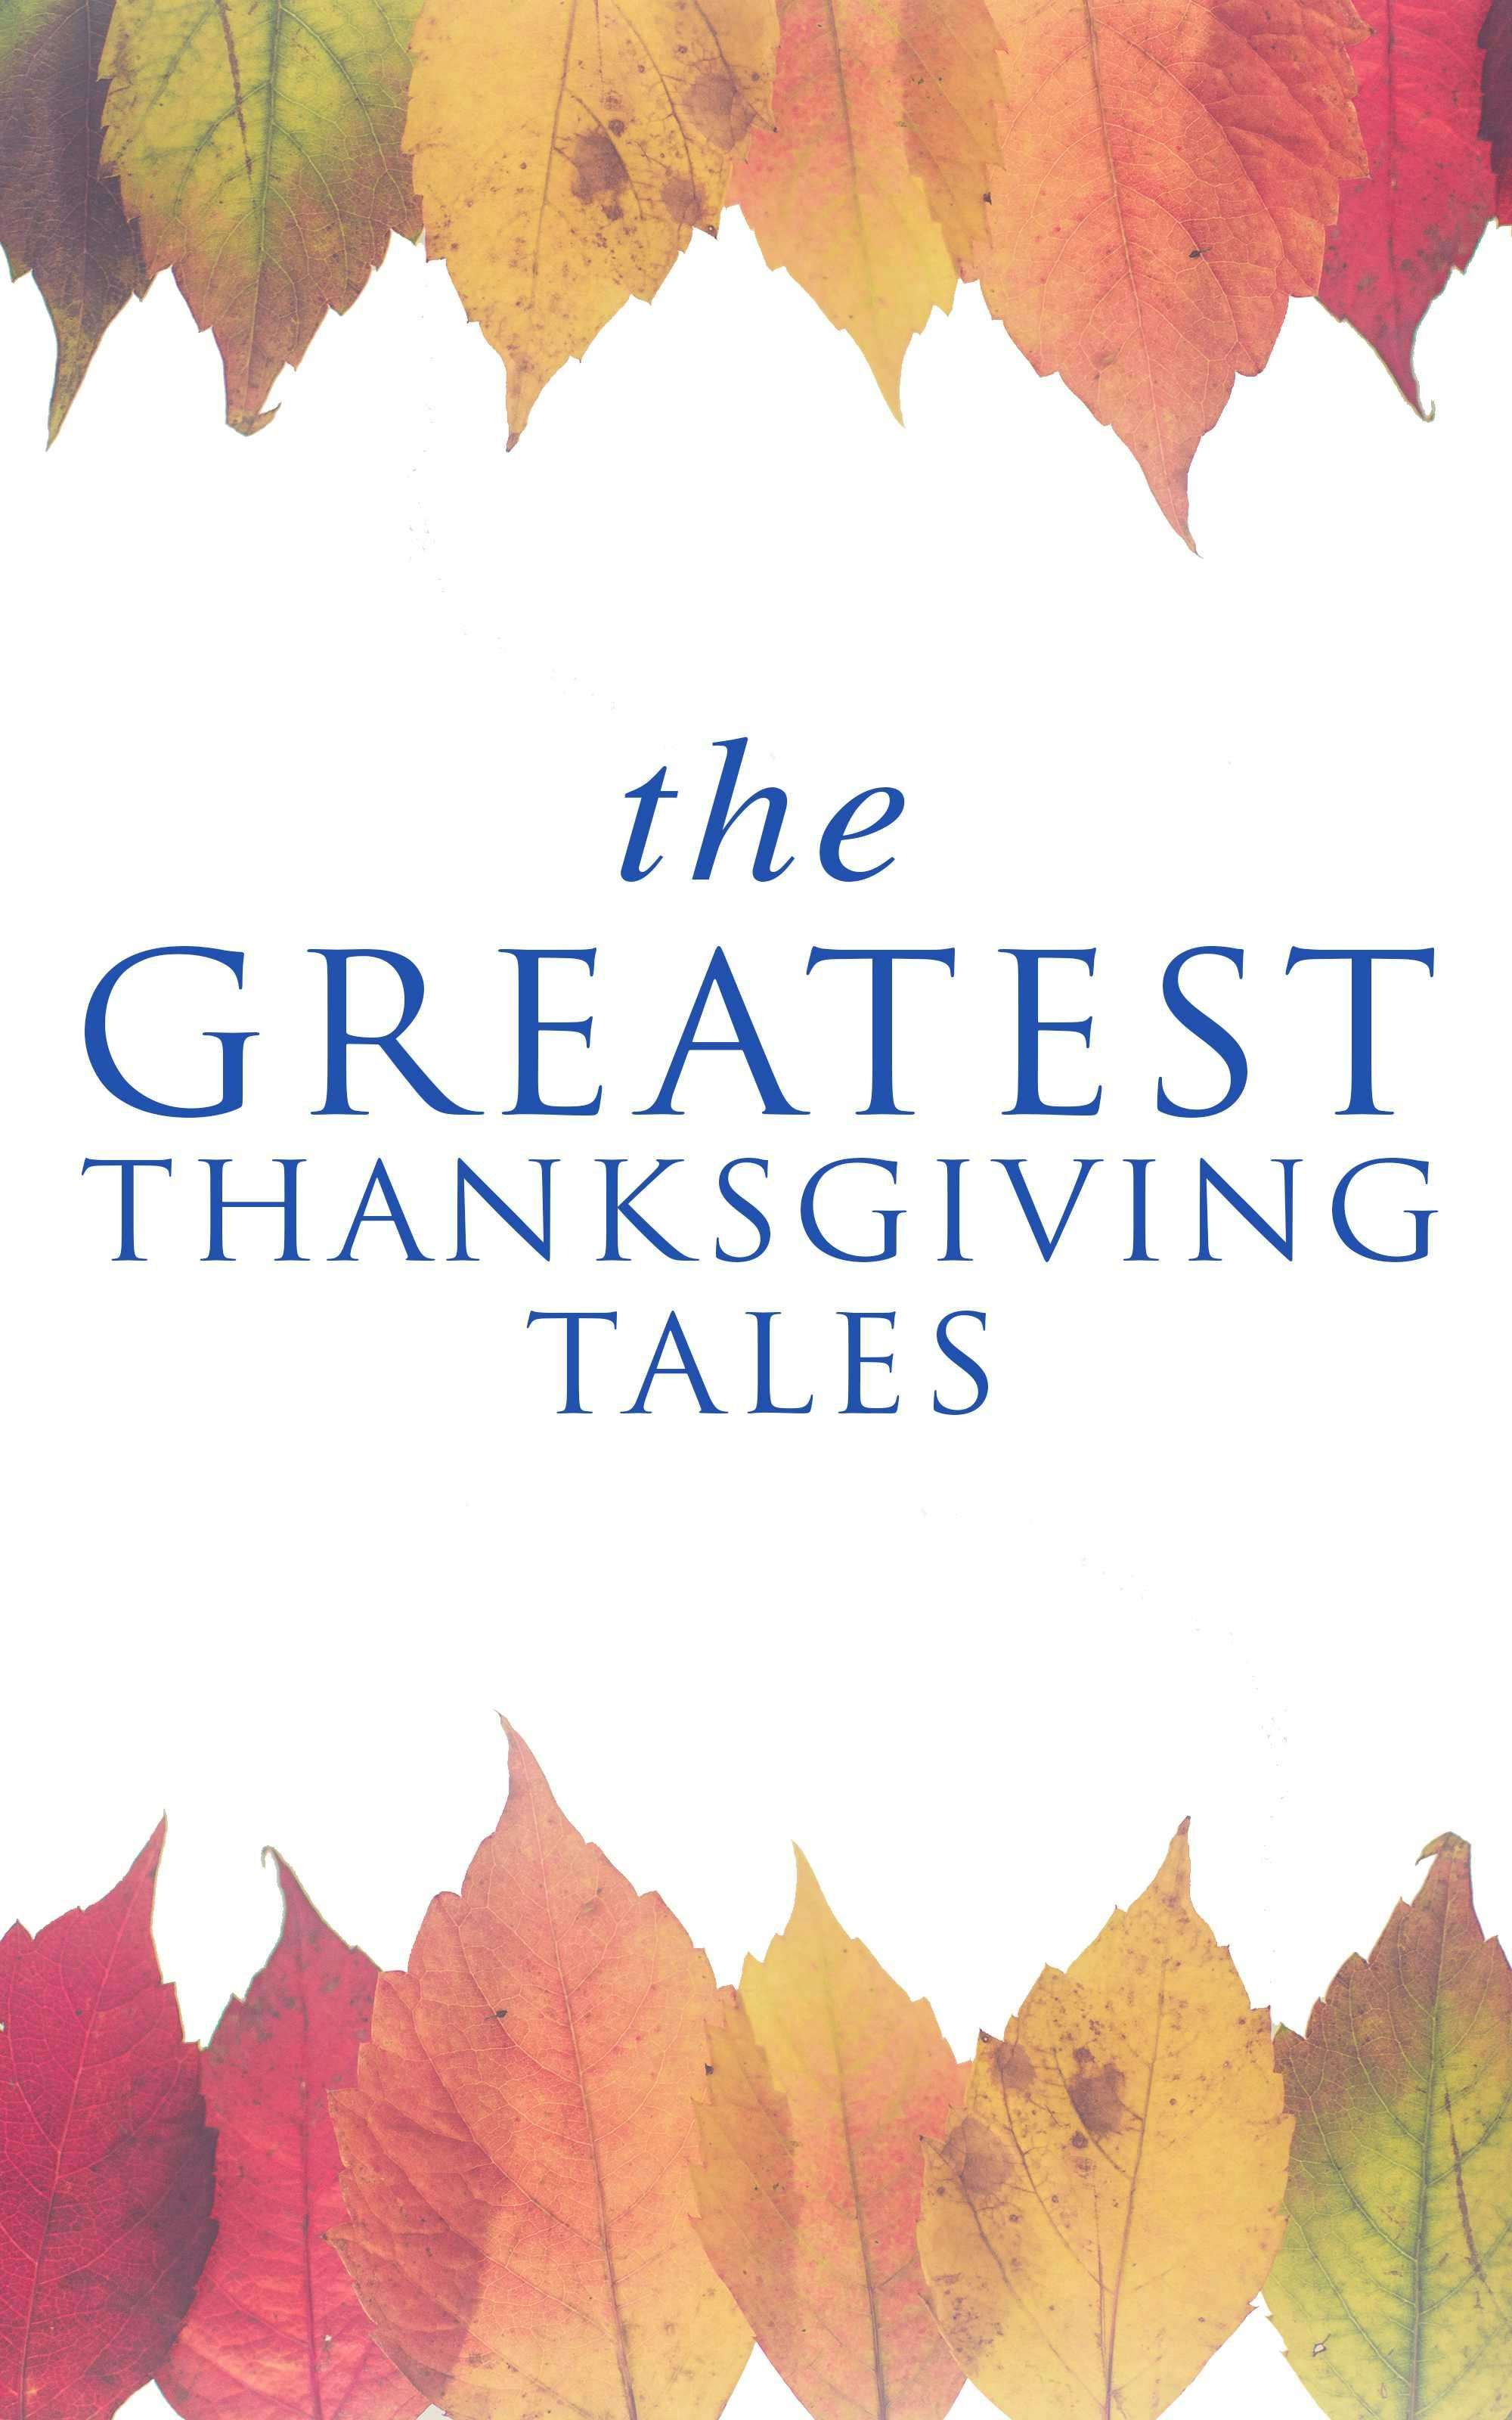 The Greatest Thanksgiving Tales: How We Kept Thanksgiving at Oldtown, Two Thanksgiving Day Gentlemen, The Master of the Harvest, Three Thanksgivings, Ezra's Thanksgivin' Out West, A Wolfville Thanksgiving... - Ida Hamilton Munsell, Lucy Maud Montgomery, Alfred Henry Lewis, Nathaniel Hawthorne, Mary Jane Holmes, O. Henry, Edward Everett Hale, Eleanor H. Porter, Eugene Field, Susan Coolidge, Andrew Lang, Charlotte Perkins Gilman, Nora Perry, Harriet Beecher Stowe, Louisa May Alcott, Sarah Orne Jewett, George Eliot, Alfred Gatty